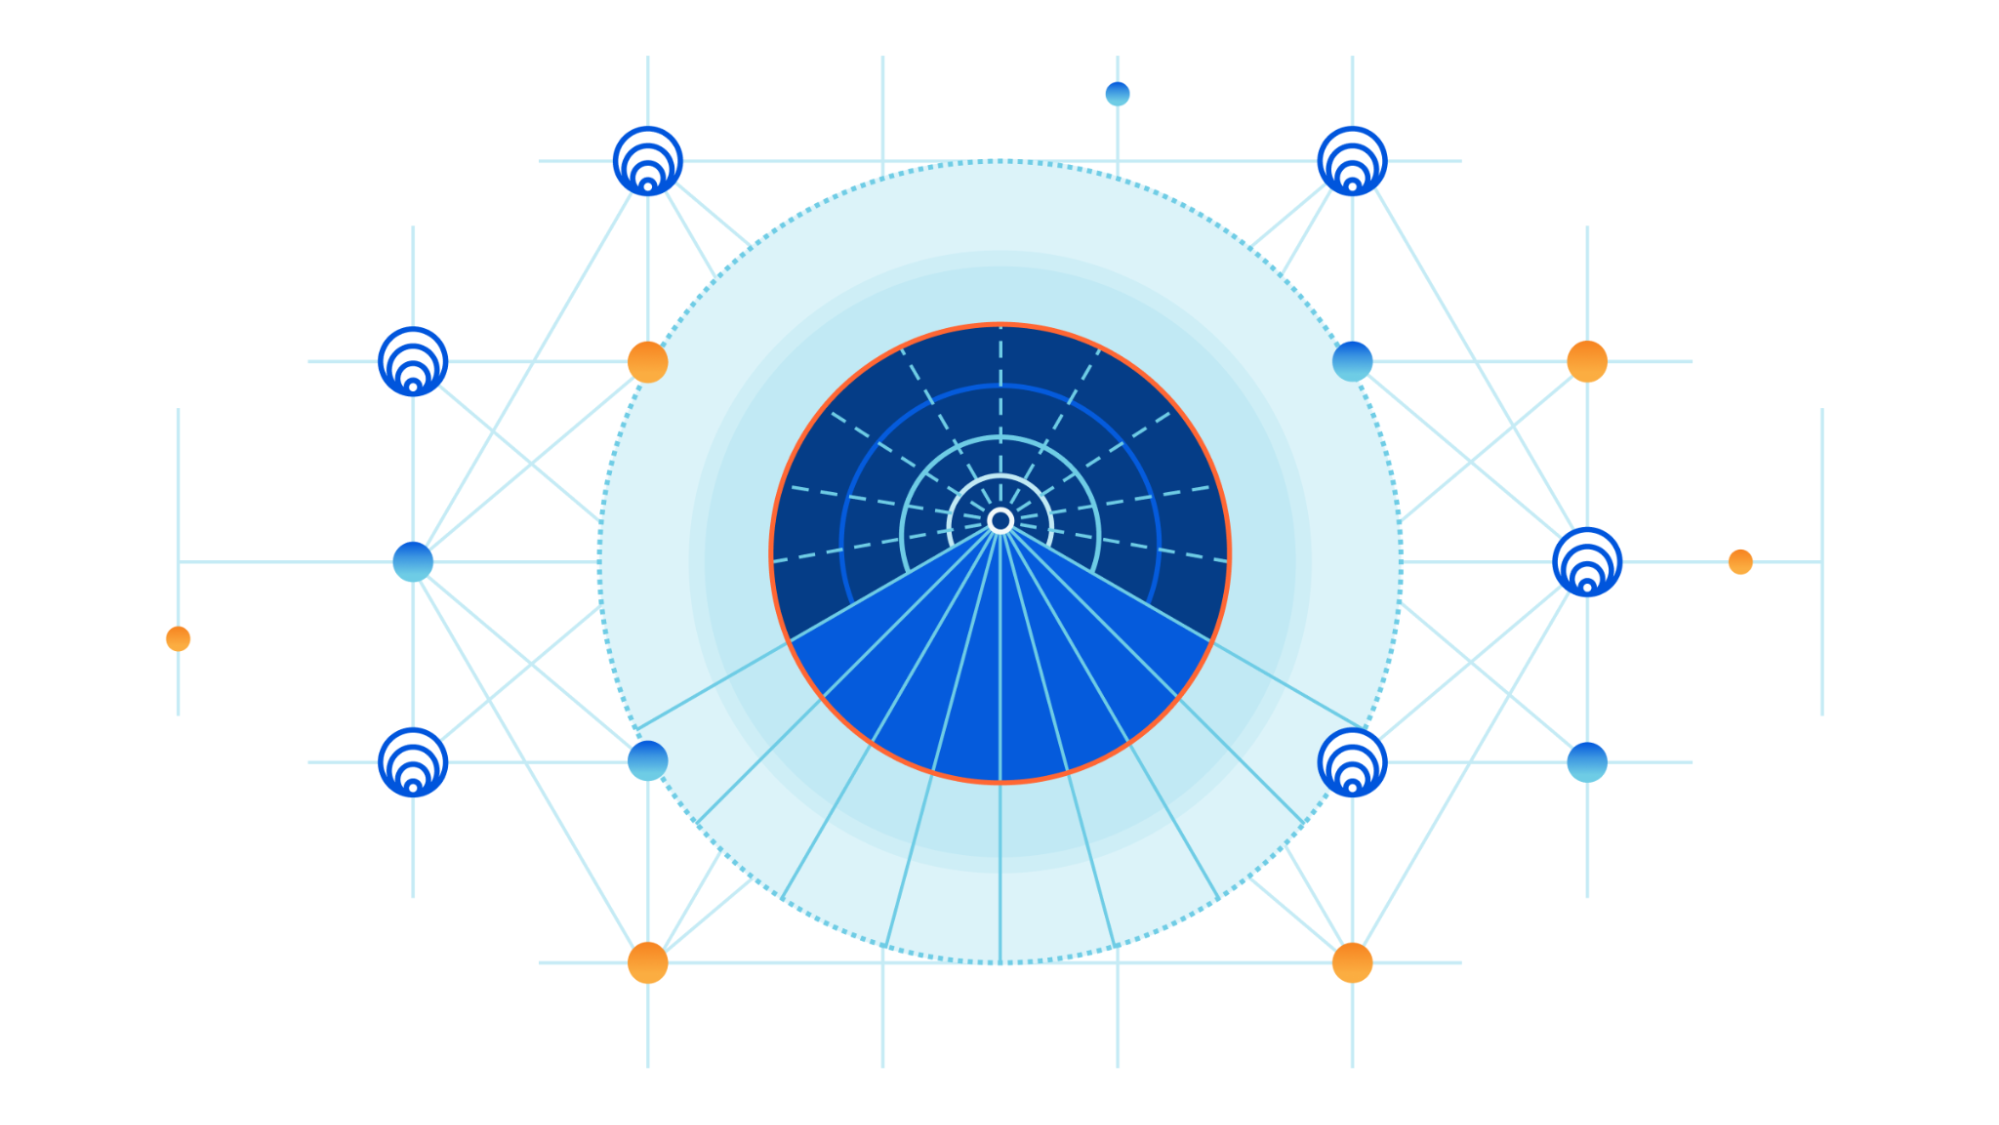 Weave your own global, private, virtual Zero Trust network on Cloudflare with WARP-to-WARP